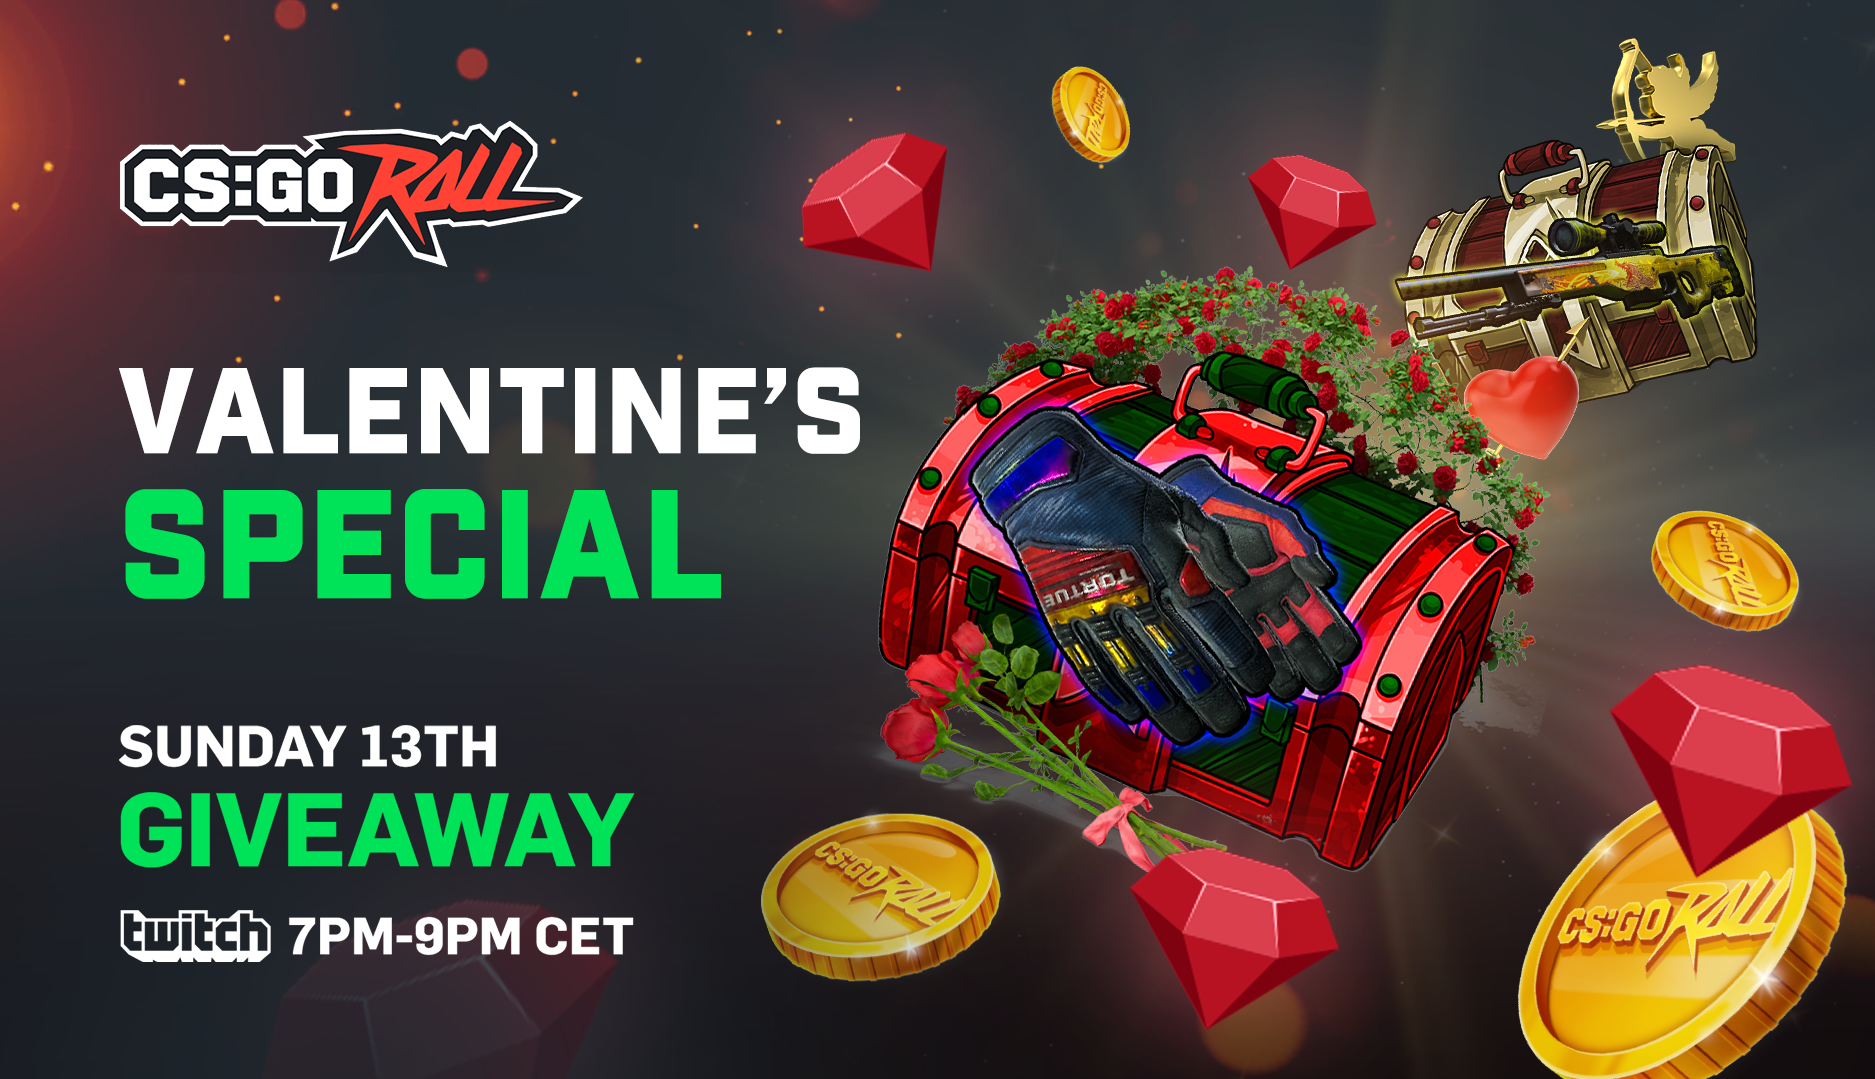 Will you be our Valentine? - CSGORoll Event